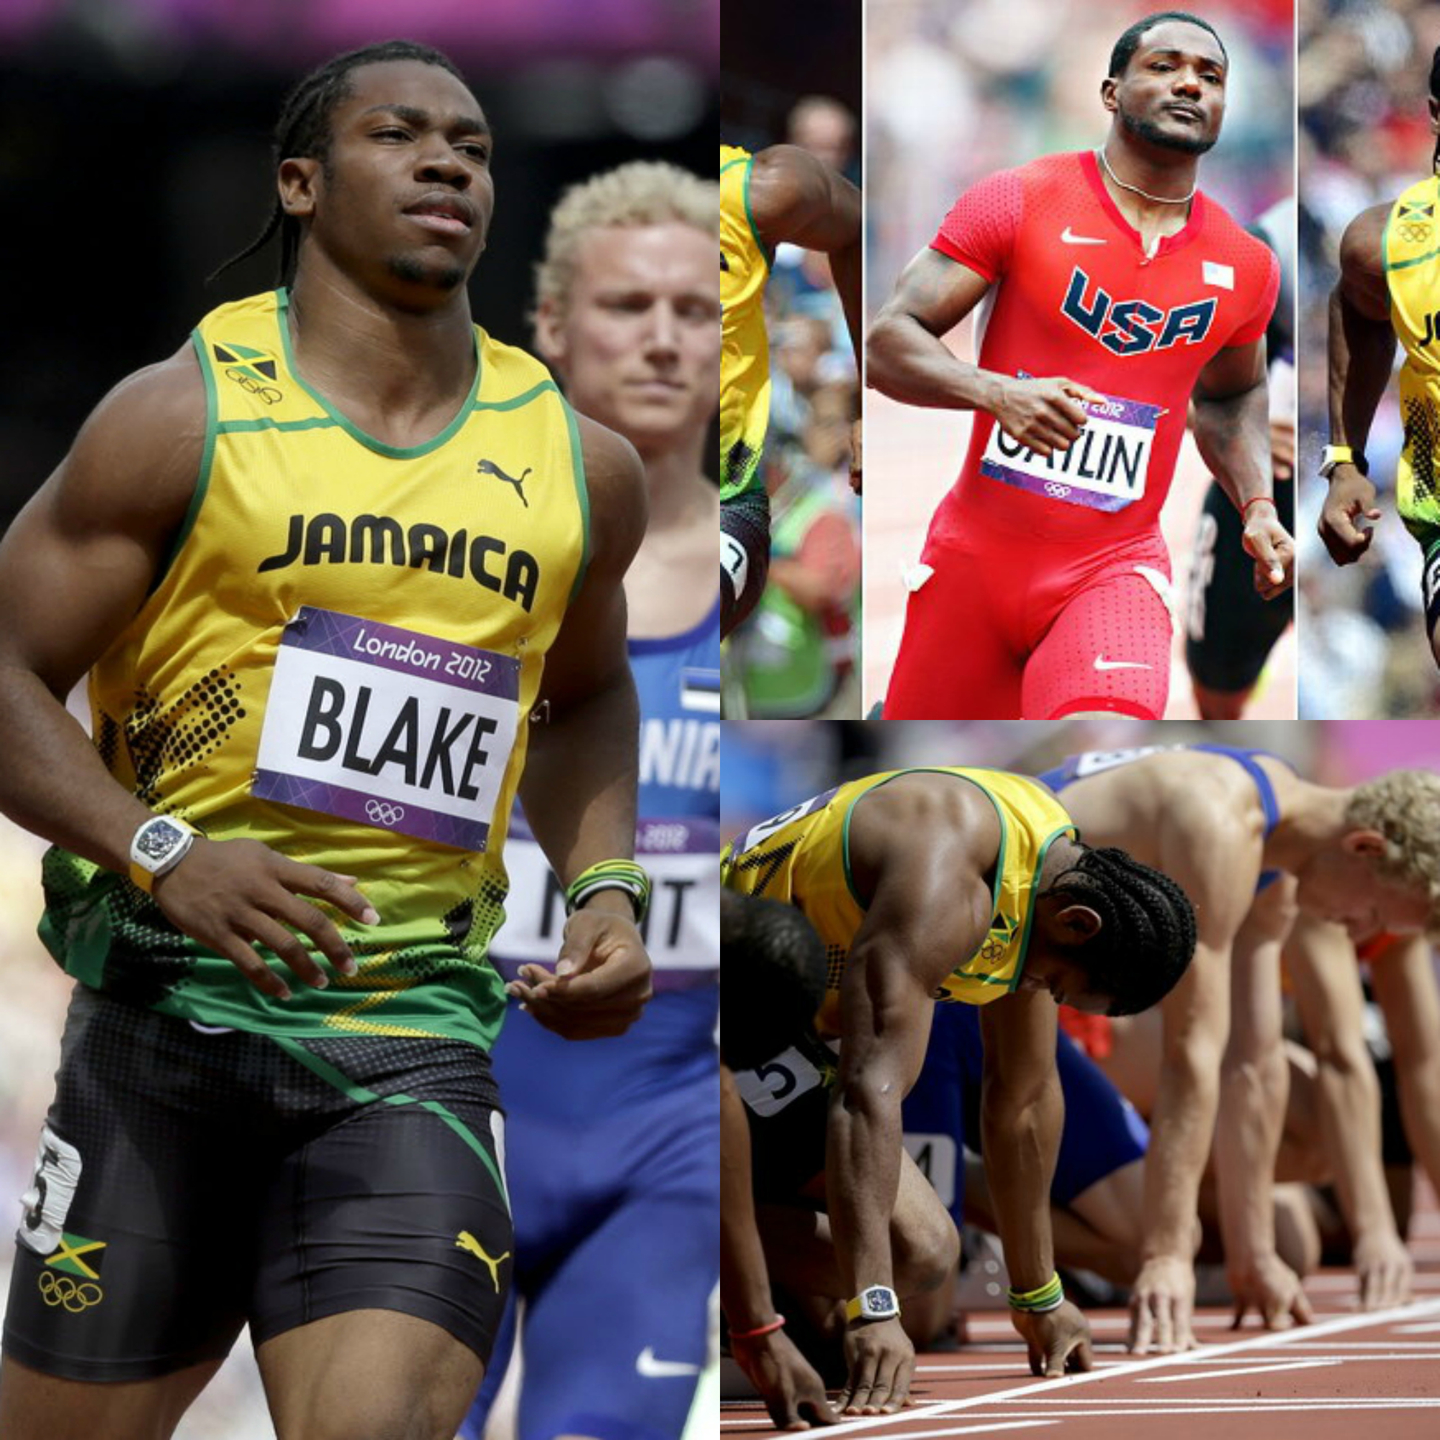 Usain Bolt and Yohan Blake to compete in 100 meter Olympic Final, Blake to do so while wearing a Richard Mille tourbillon